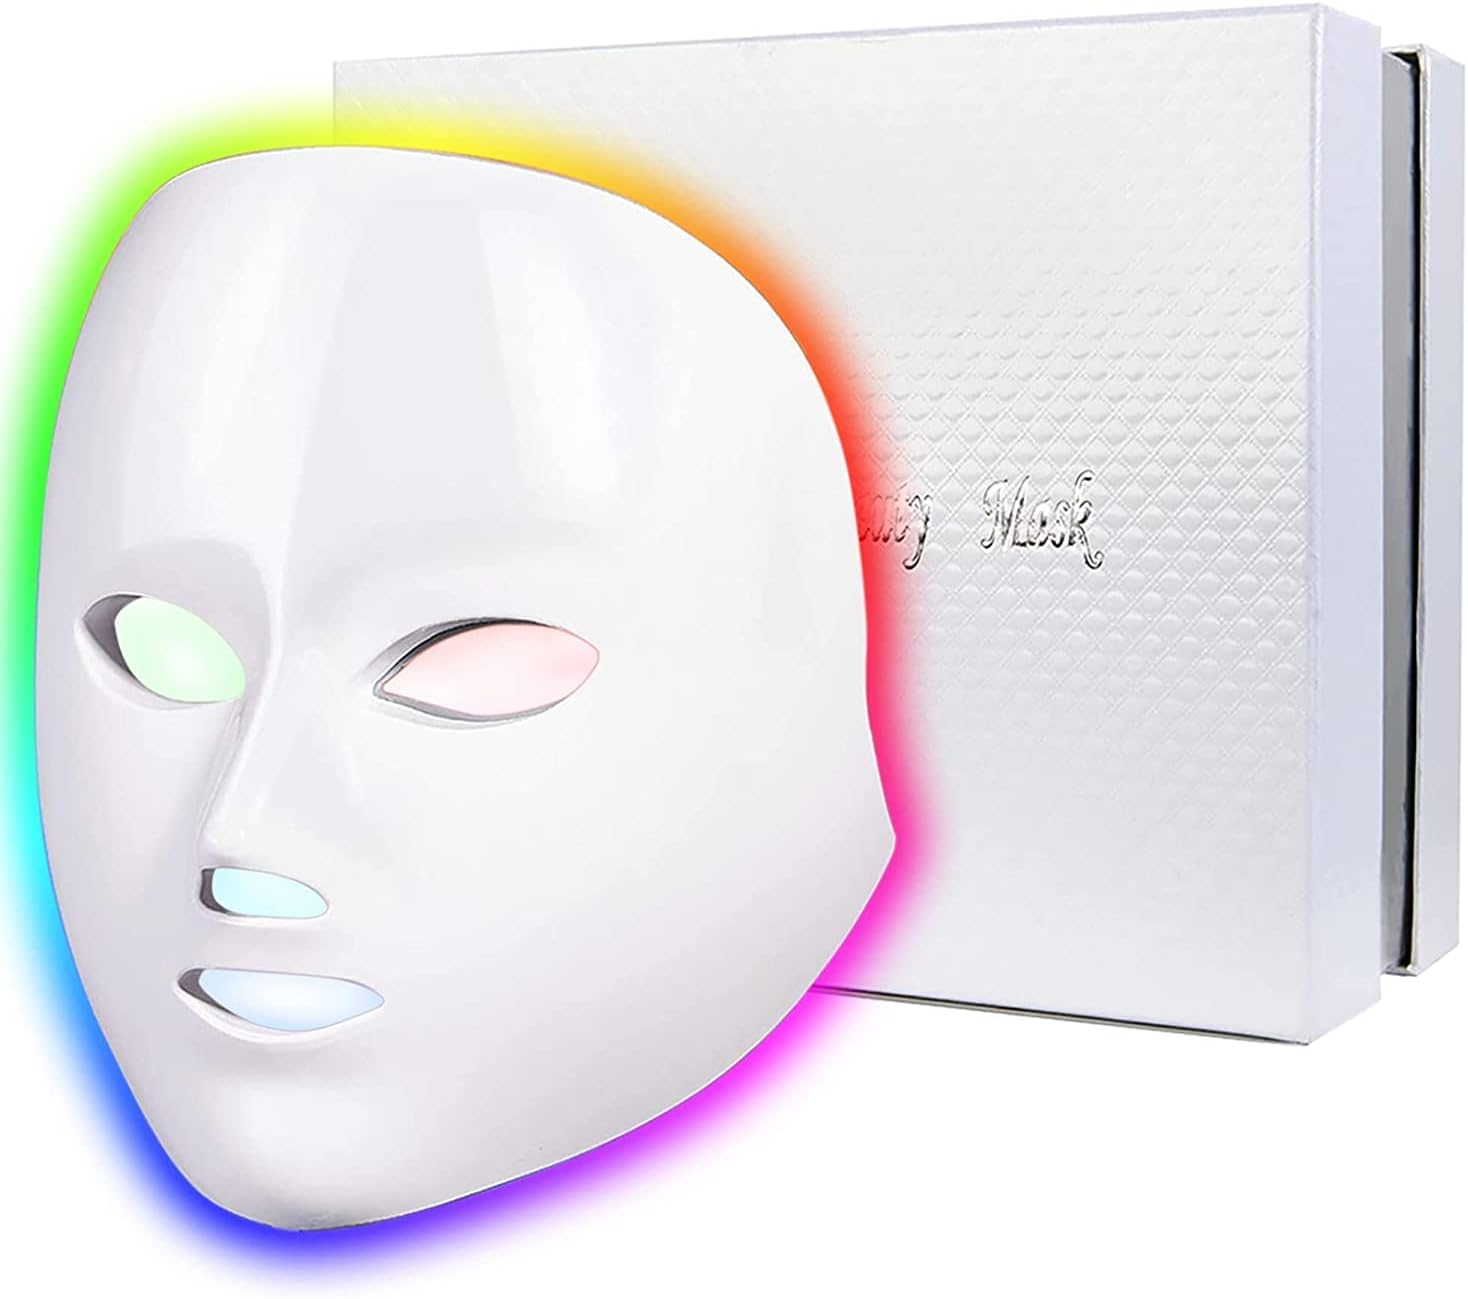 HOCBDLLLA Red-Light-Therapy-for-Face, Led Face Mask Light Therapy 7 Colors LED Facial Mask at Home Skin Rejuvenation Facial Skin Care Mask